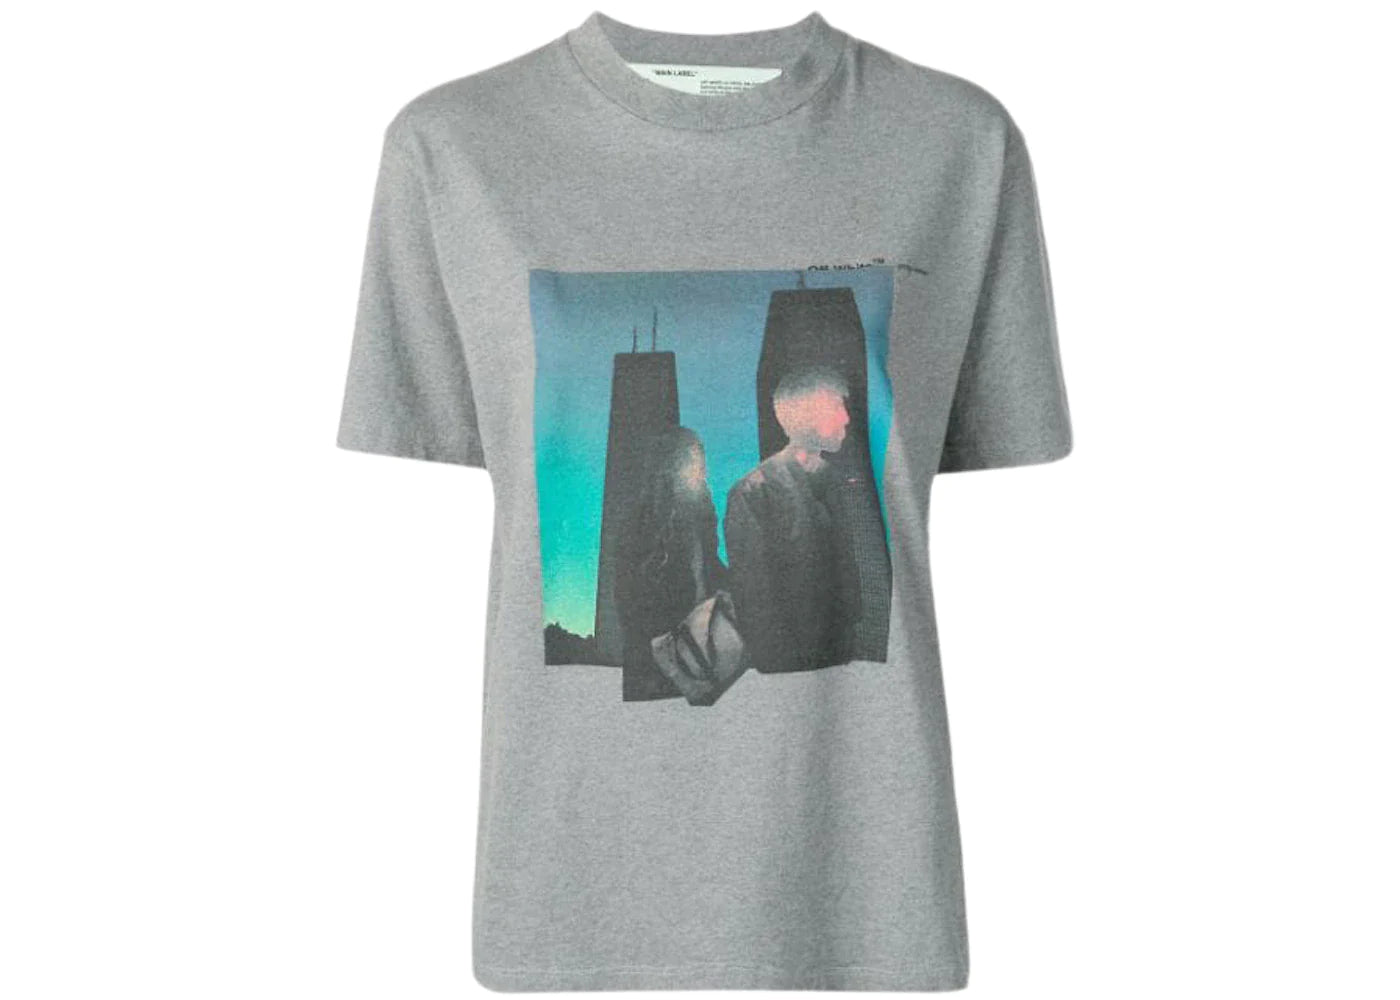 OFF-WHITE WOMAN Graphic Print T-shirt Grey/Multicolor